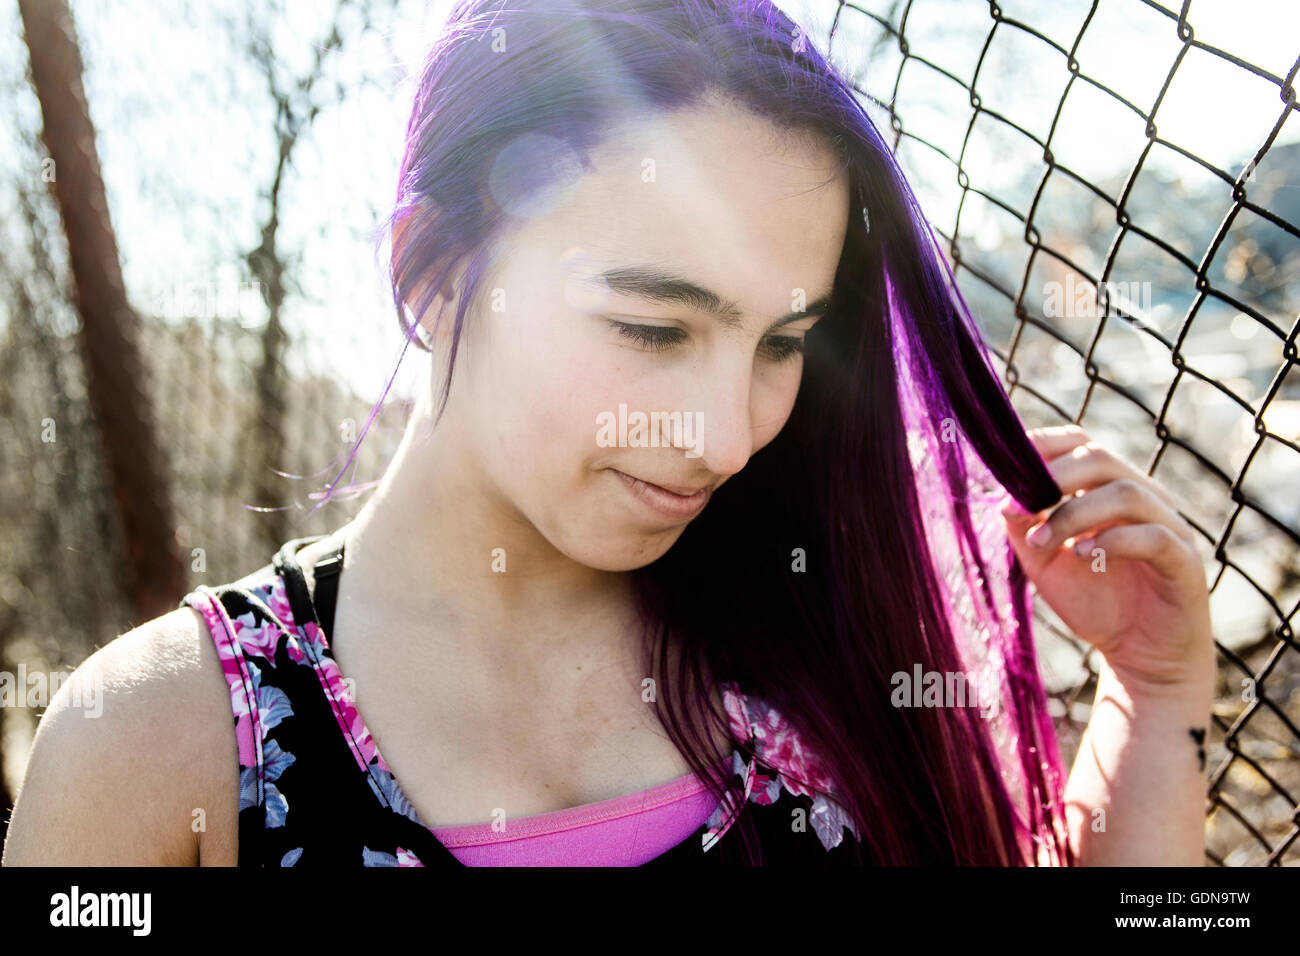 girl outside portrait with purple hair Stock Photo